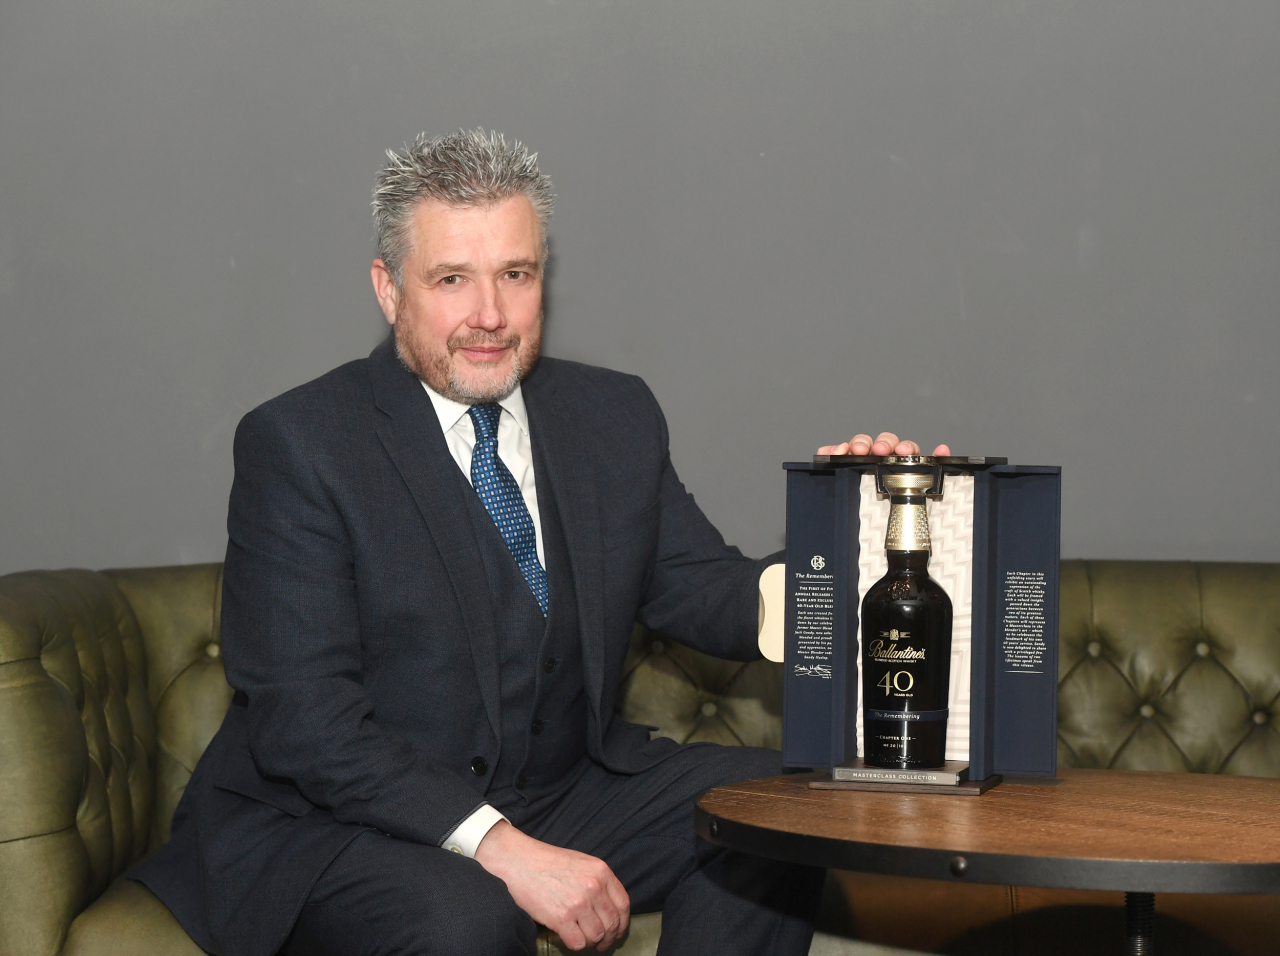 Sandy Hyslop, the master blender at Ballantine’s, poses for a picture next to one of the six bottles of the whisky producer’s new 40-year-old expression, 